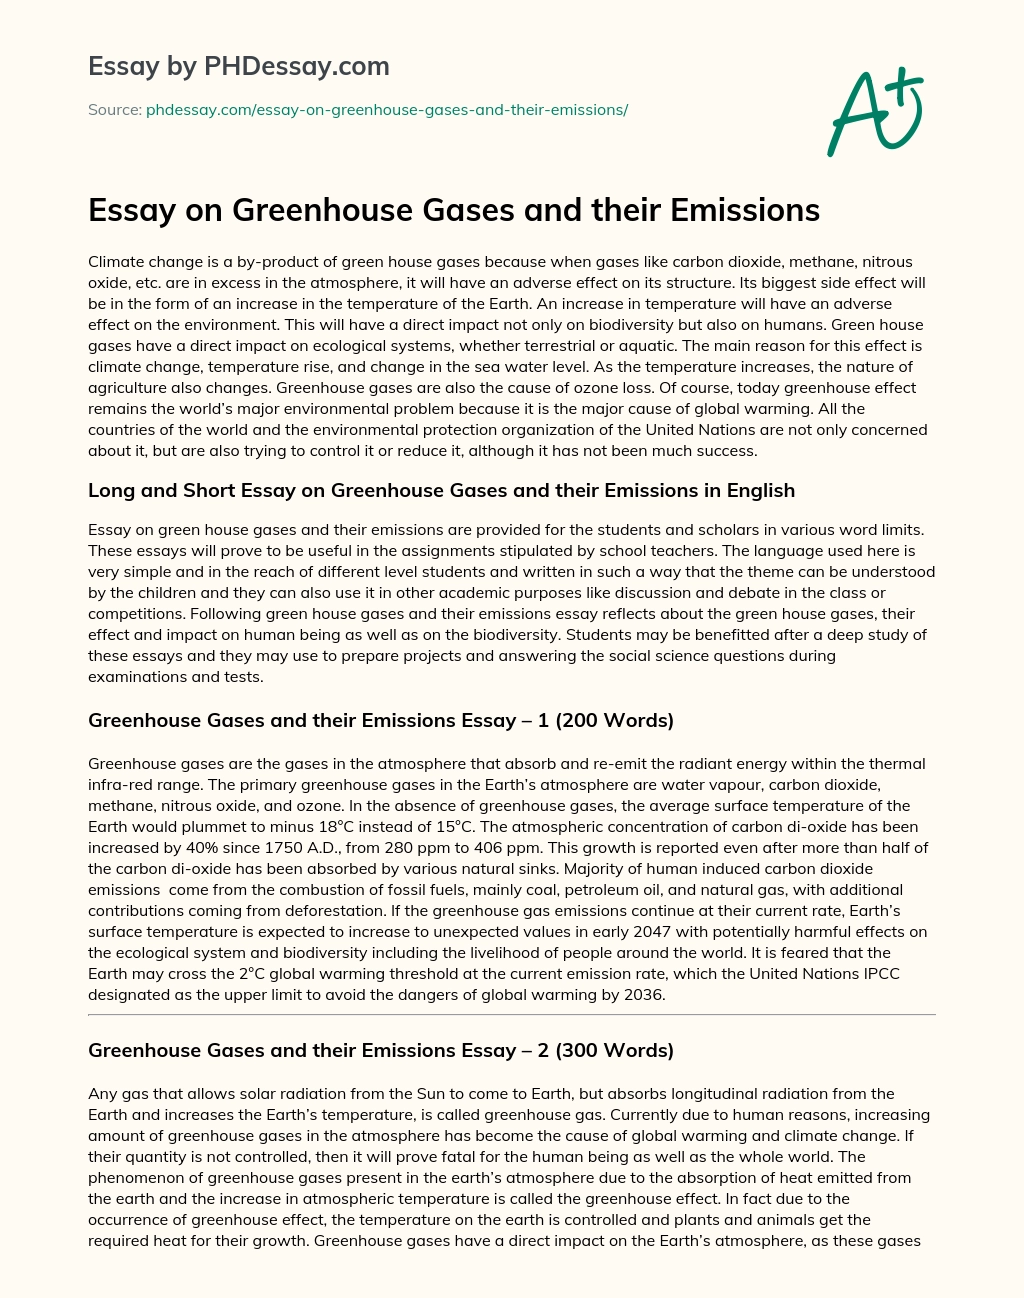 Essay on Greenhouse Gases and their Emissions essay